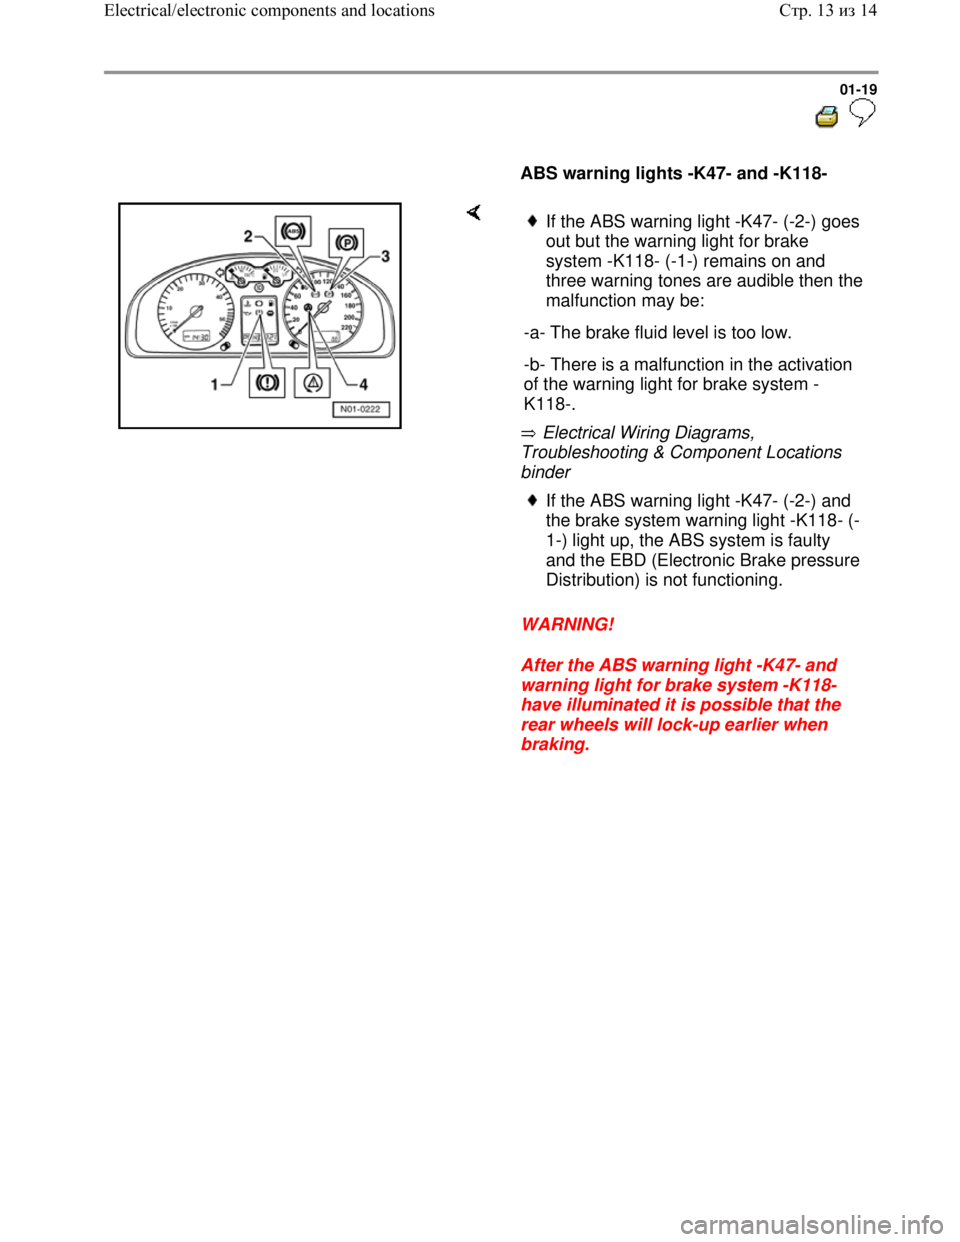 VOLKSWAGEN JETTA 1998  Service Manual Downloaded from www.Manualslib.com manuals search engine 01-19
  
 
     
ABS warning lights -K47- and -K118-  
    
 Electrical Wiring Diagrams, 
Troubleshooting & Component Locations 
binder 
WARNIN